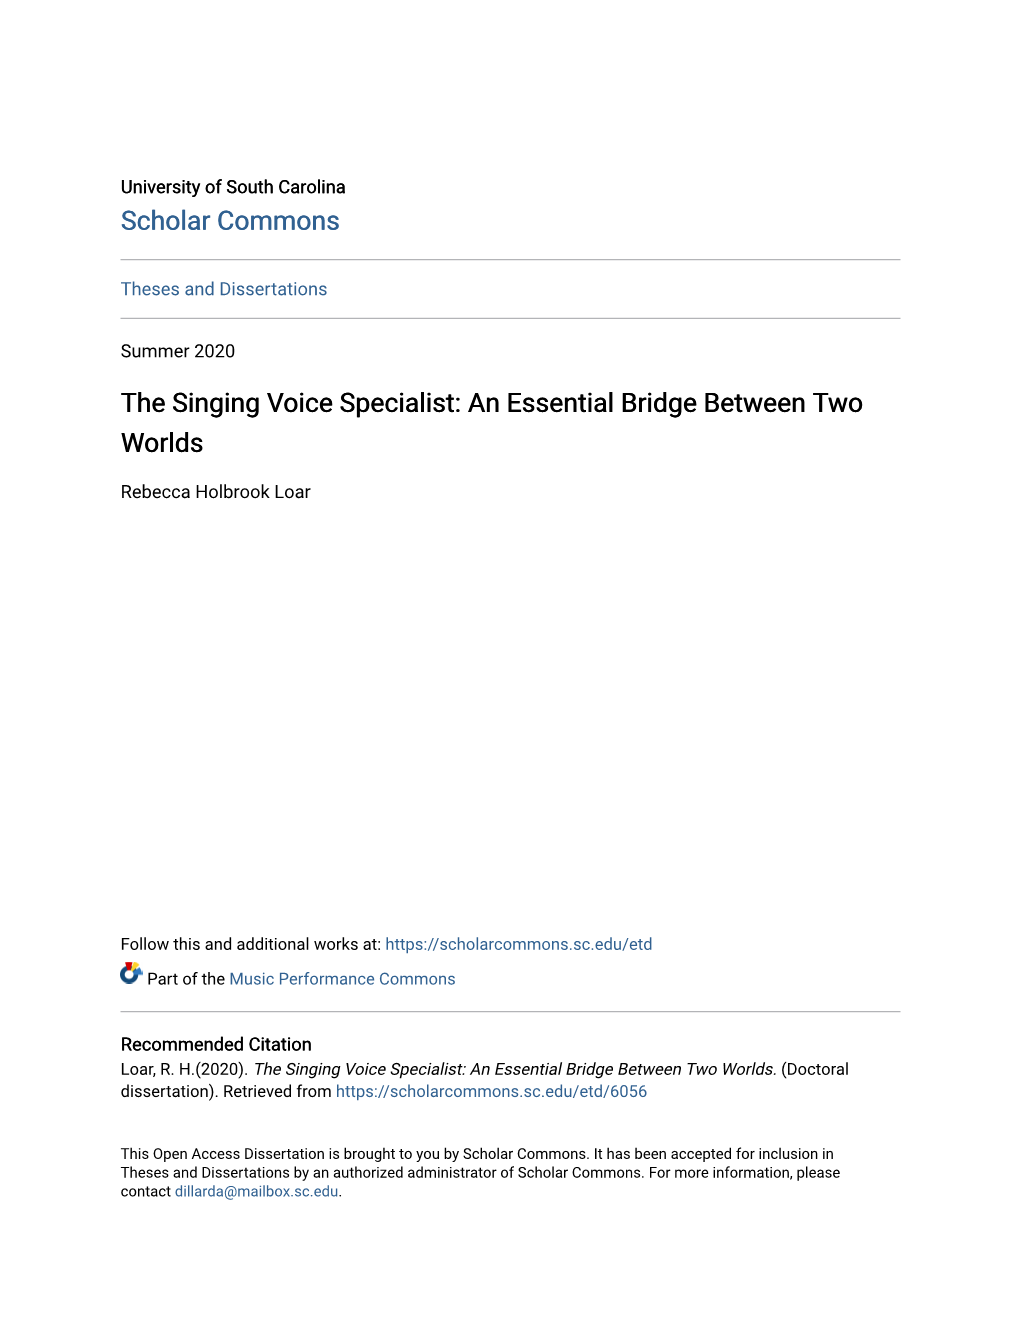 The Singing Voice Specialist: an Essential Bridge Between Two Worlds